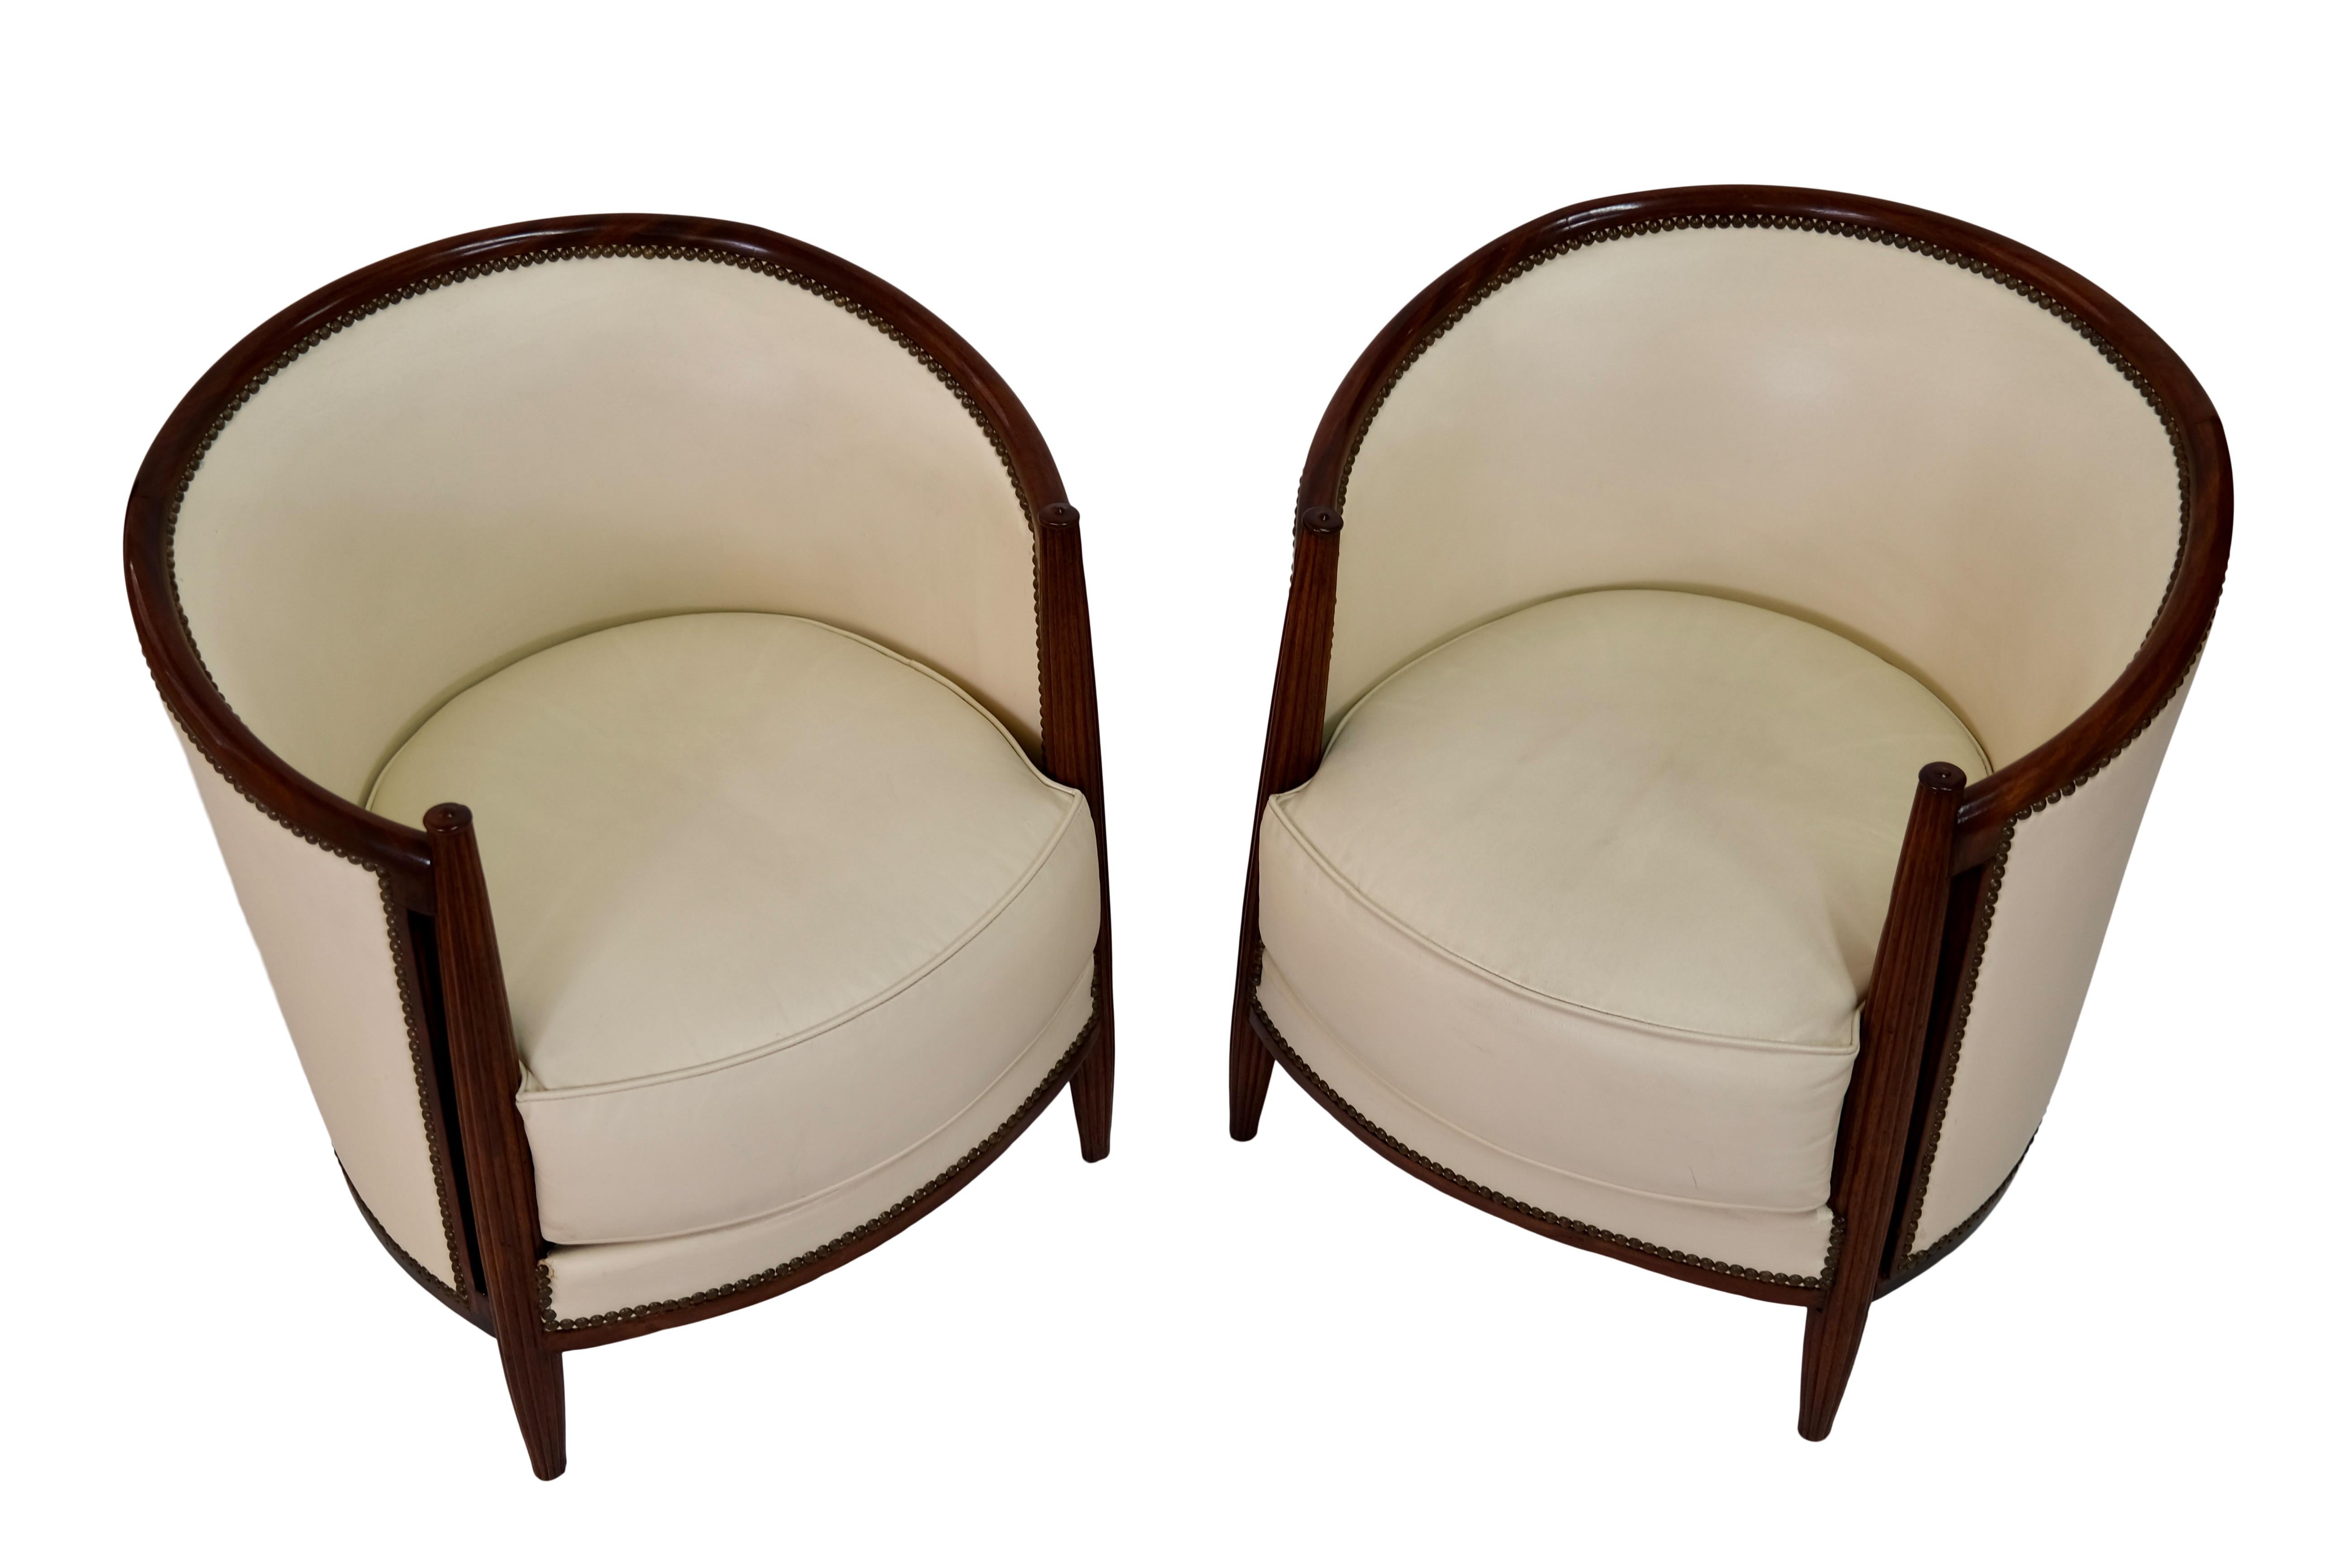 Pair of early Art Deco club chairs
Channeled legs
Solid Mahogany
Beige colored leather, reupholstery in the past 

Early Art Deco, France circa 1925

Dimensions: 
Width: 66cm
Height: 72 cm
Depth: 66 cm
Seat height: 44 cm.